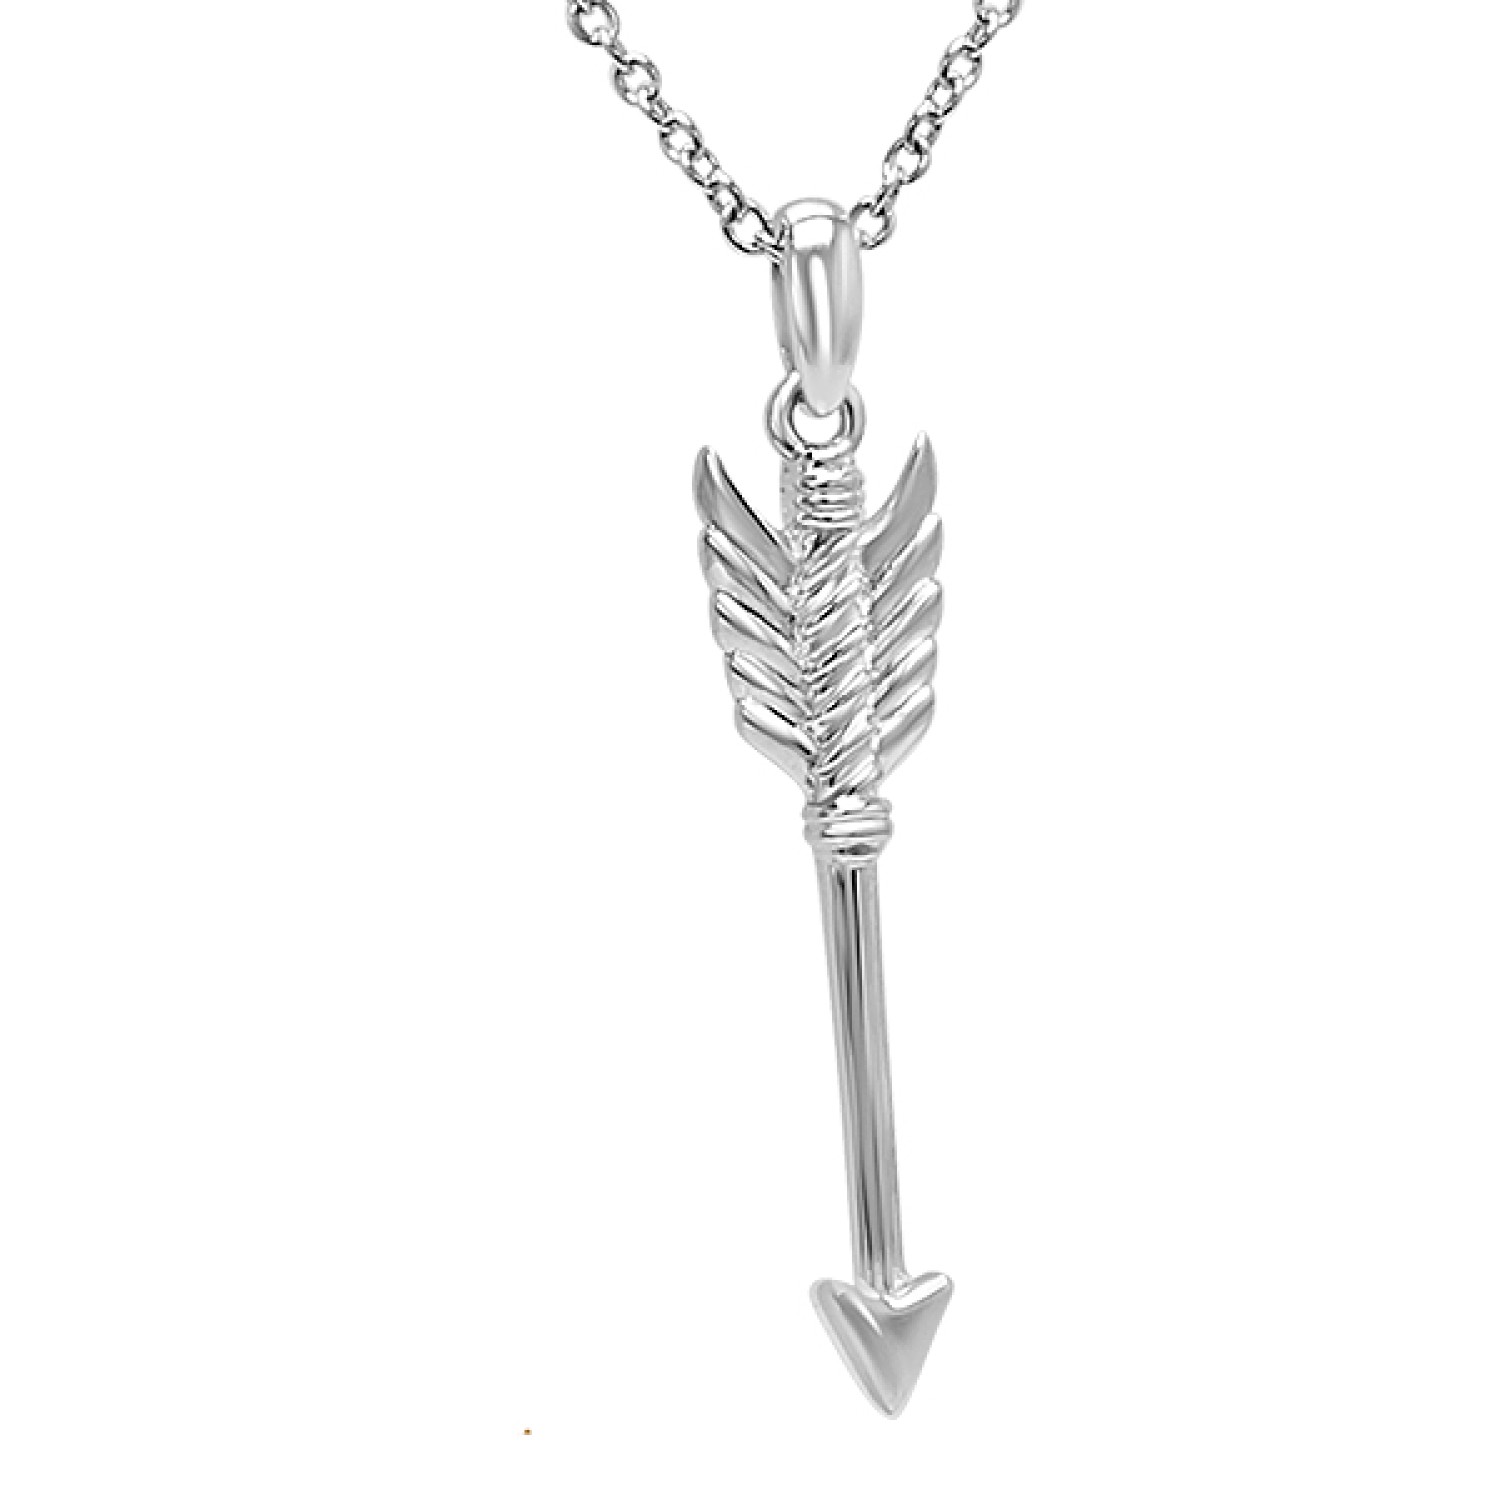 Legolas Arrow Necklace Pendant. Official The Hobbit Legolas Arrow Necklace Pendant  Made in 925 Sterling Silver 28mm in Length Supplied with a 45cm (18inches) Sterling Silver Pendant Chain. Comes with pouch, gift box and license of authenticit @christies.